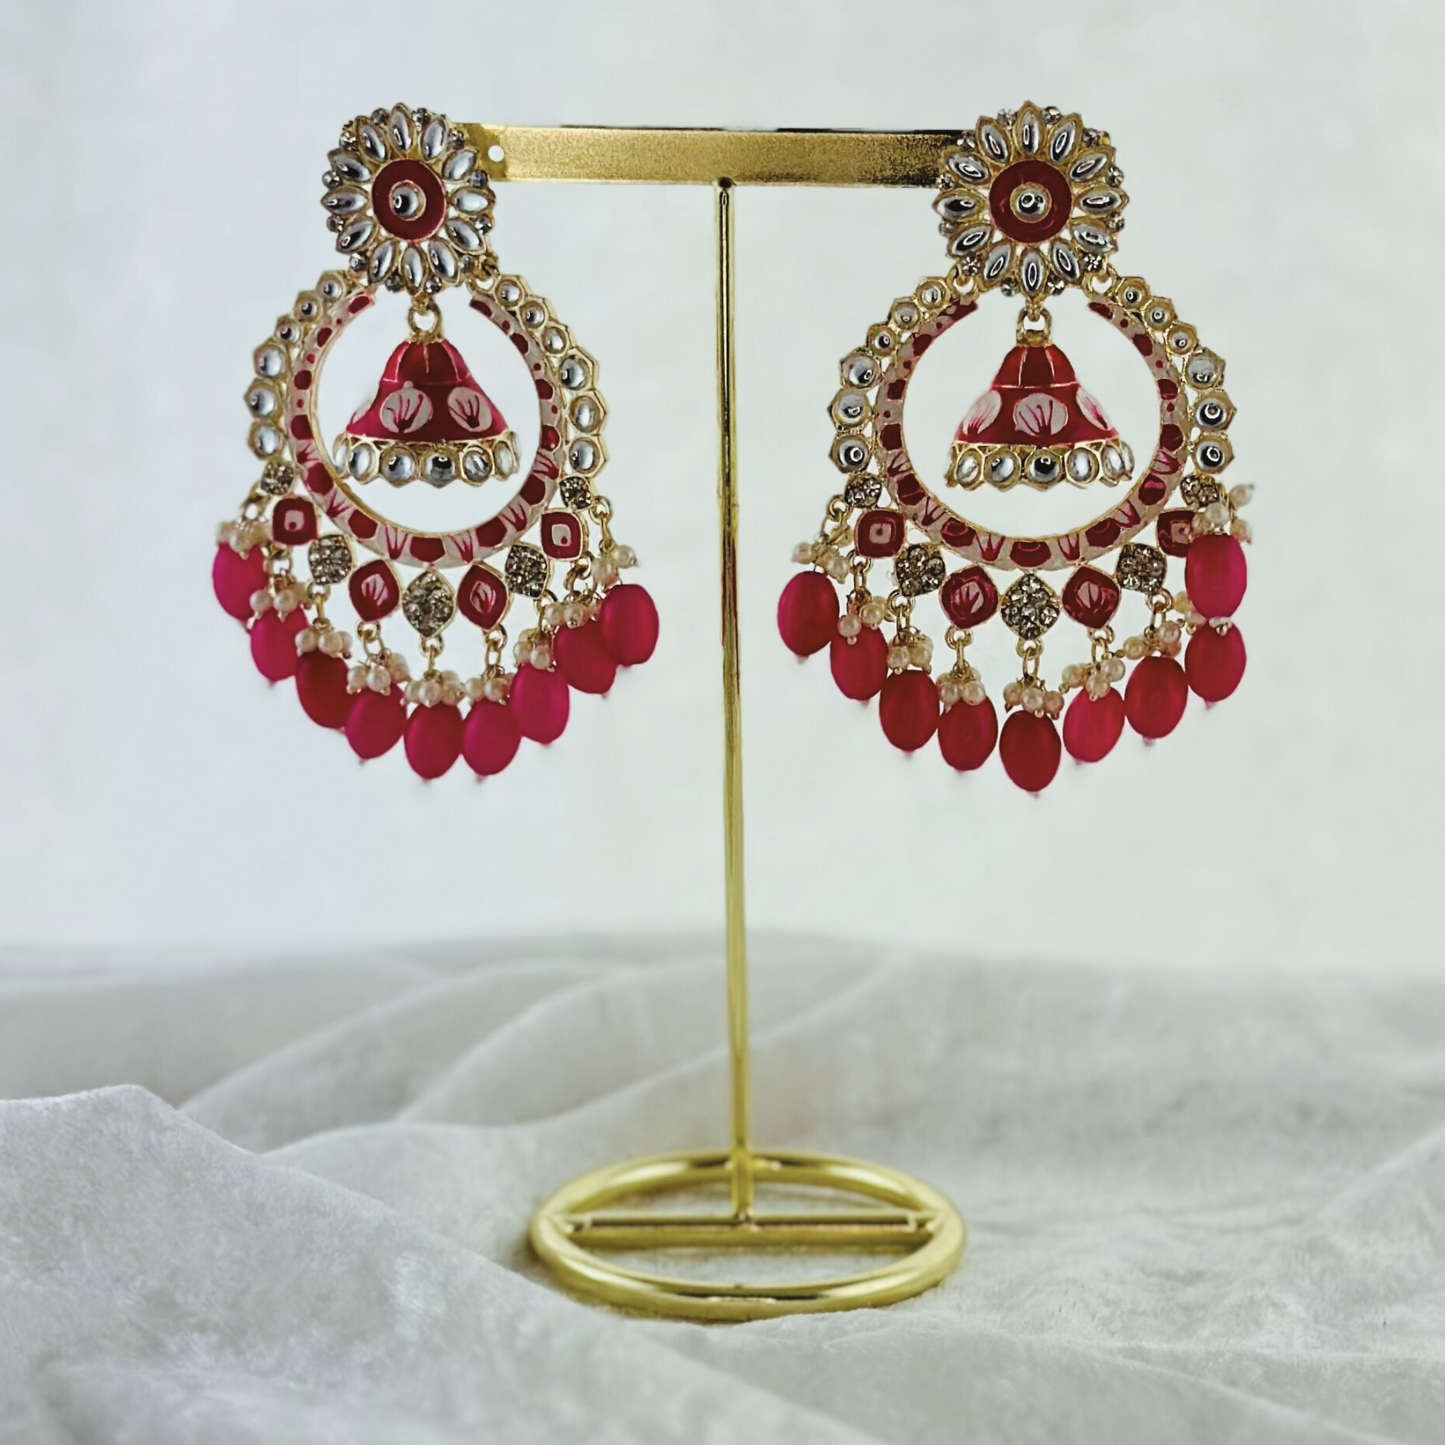 High quality hand painted hot pink earrings with beads.  Latest 2023 fashion, prefect for Indian weddings, parties & special occasions.